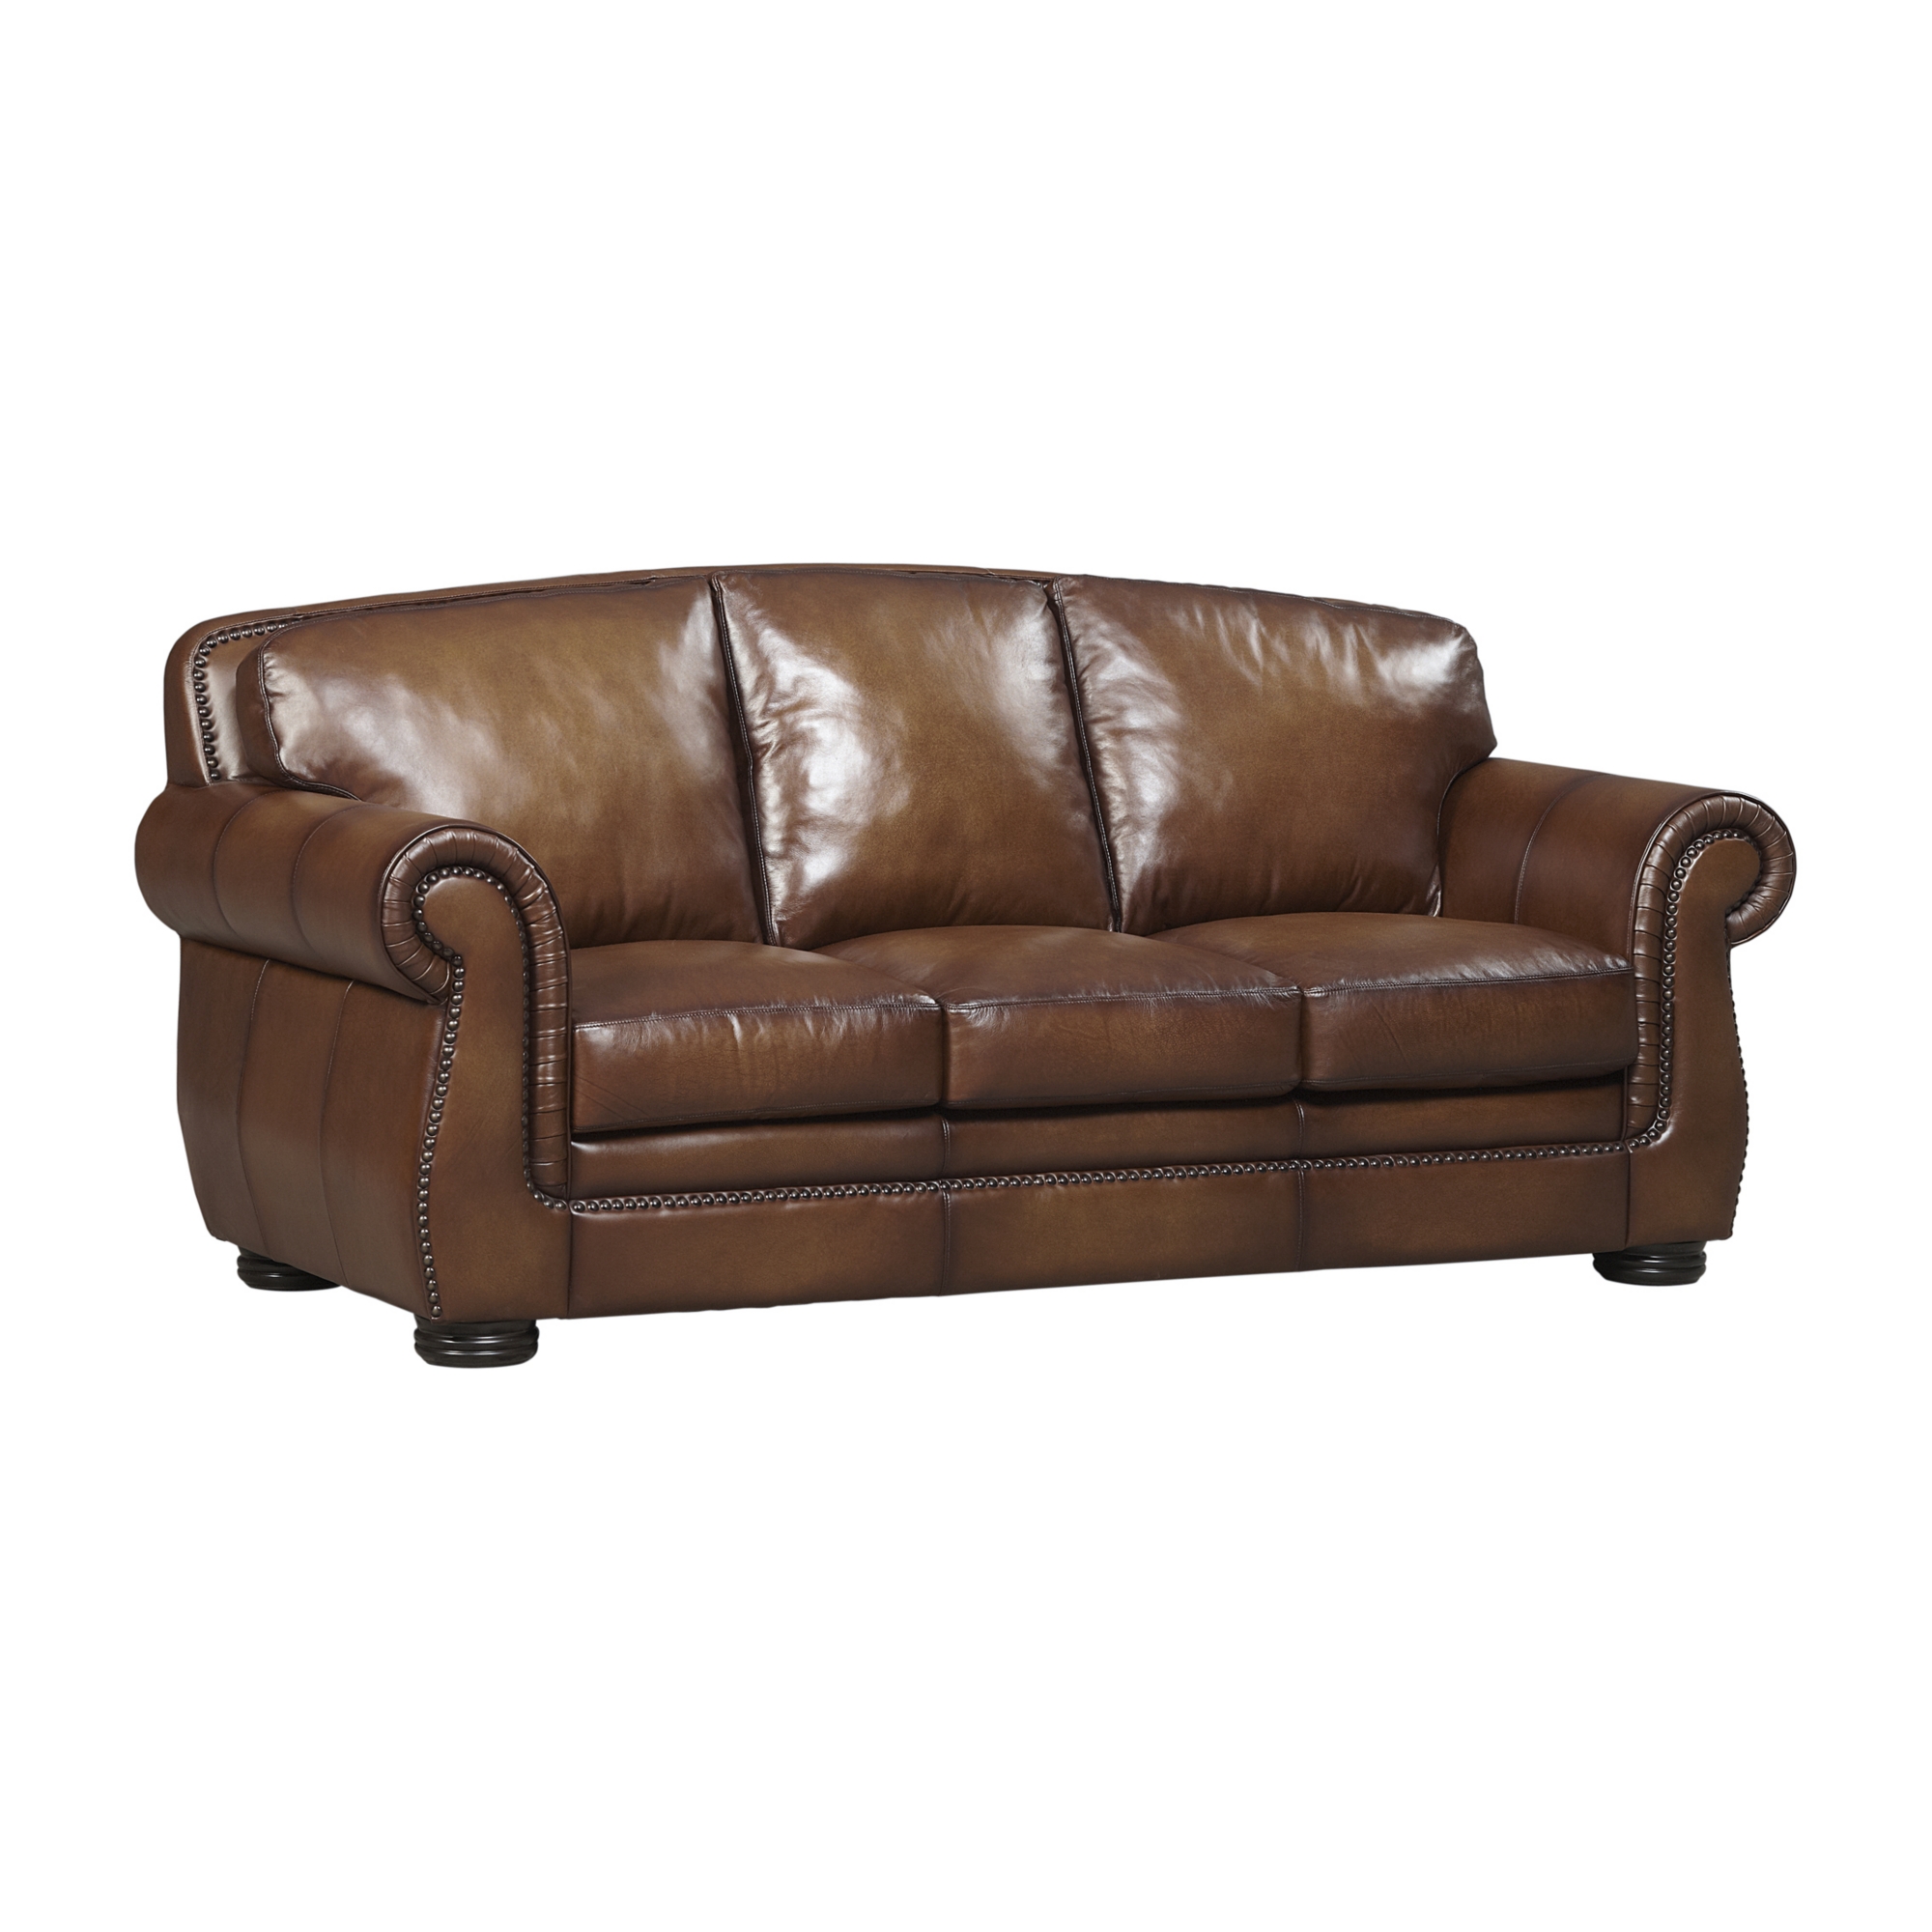 Vintage Autumn Sofa Find The Perfect, Antique Leather Couch